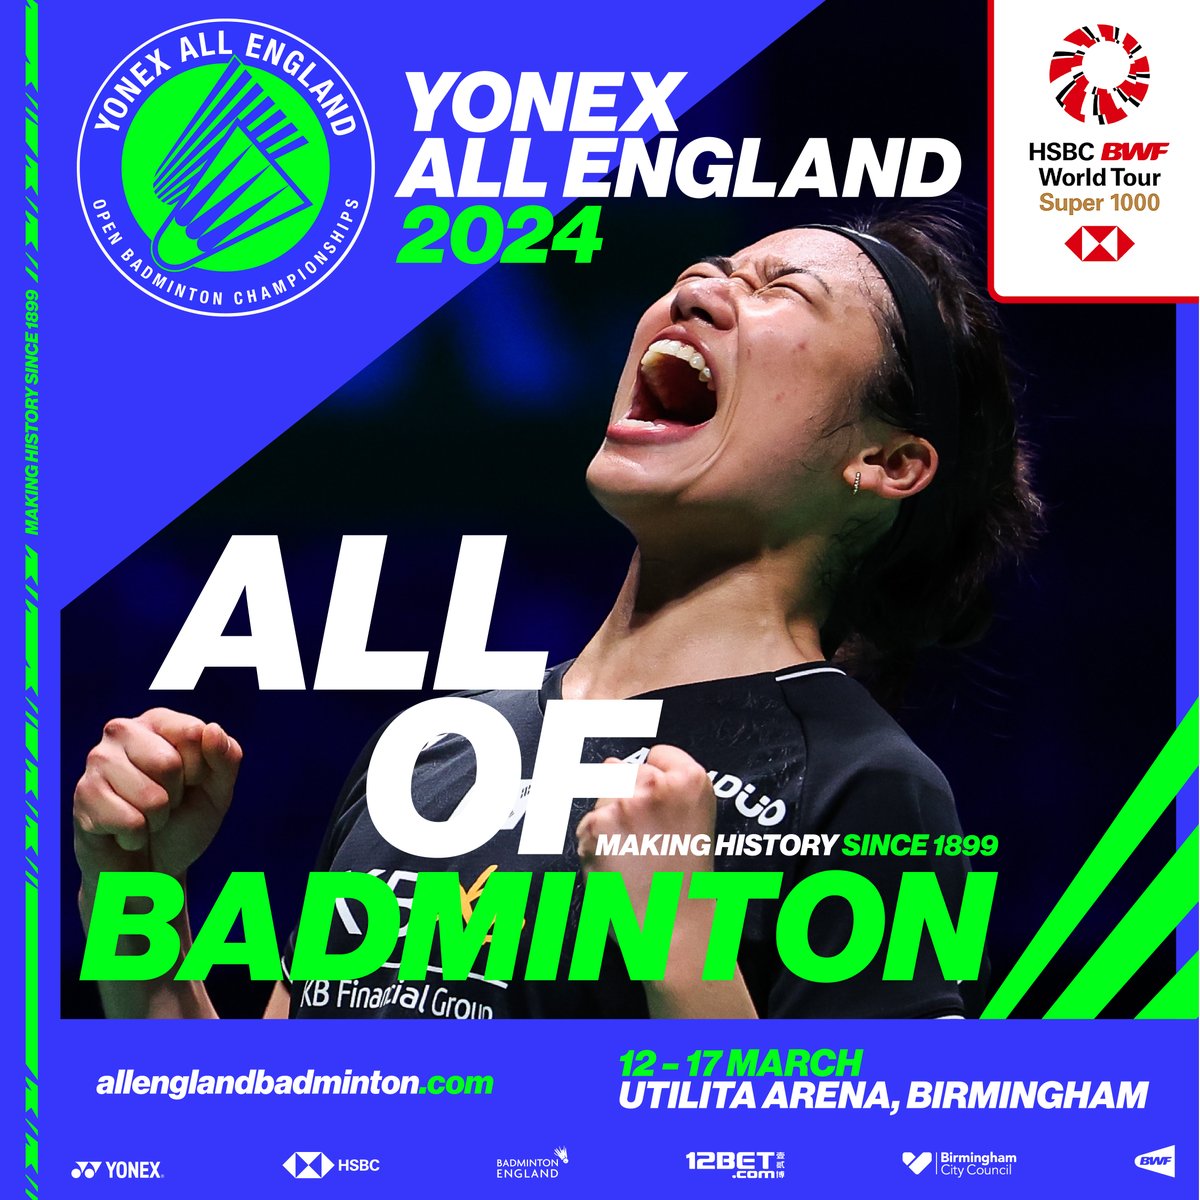 🚨 IMPORTANT: YONEX All England Open Badminton Championships 2024 Due to the first session overrunning, there may be a delay with doors opening to watch the second session. @YonexAllEngland